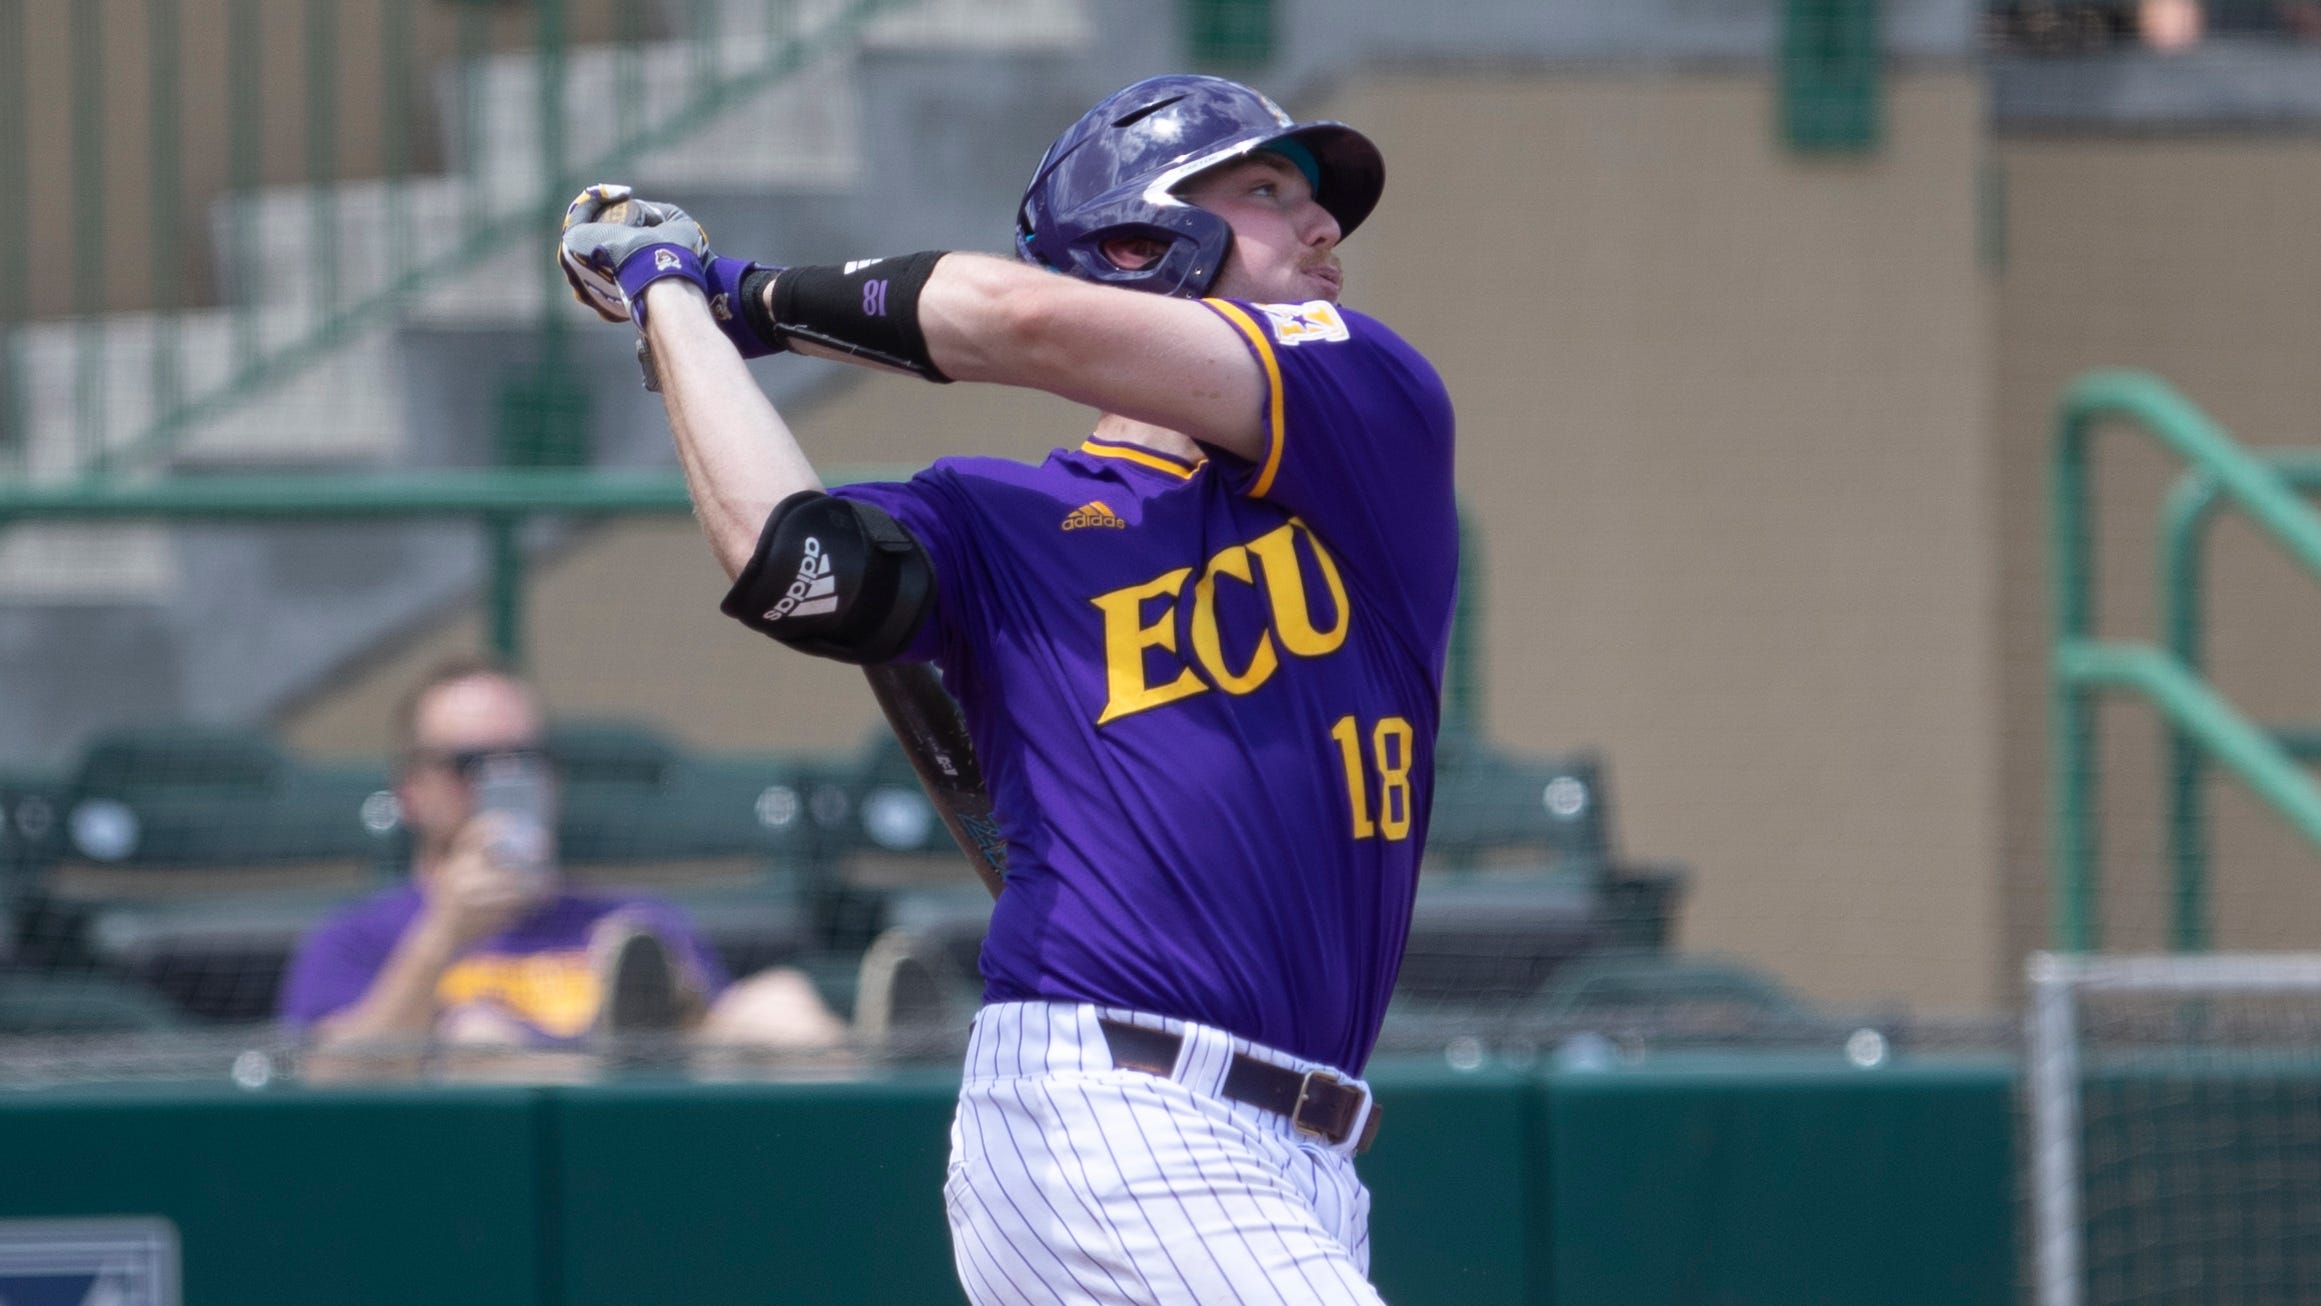 8. Bryant Packard, 22, 6-3, 200, OF: The Tigers might have gotten a rough, draft-day, position-player equivalent to Tarik Skubal in Packard, who was snagged in the fifth round last June from East Carolina. He has one enduring quality: Packard can hit. And that left-handed bat means the Tigers will overlook defense and speed that aren’t by any means plus skills and happily make room for him somewhere in their lineup, should the bat and his considerable power develop as they surely could. Packard last summer tore it up at Connecticut and West Michigan and even had a five-game stint at Lakeland. His box-score data will be worth following, regularly, in 2020.